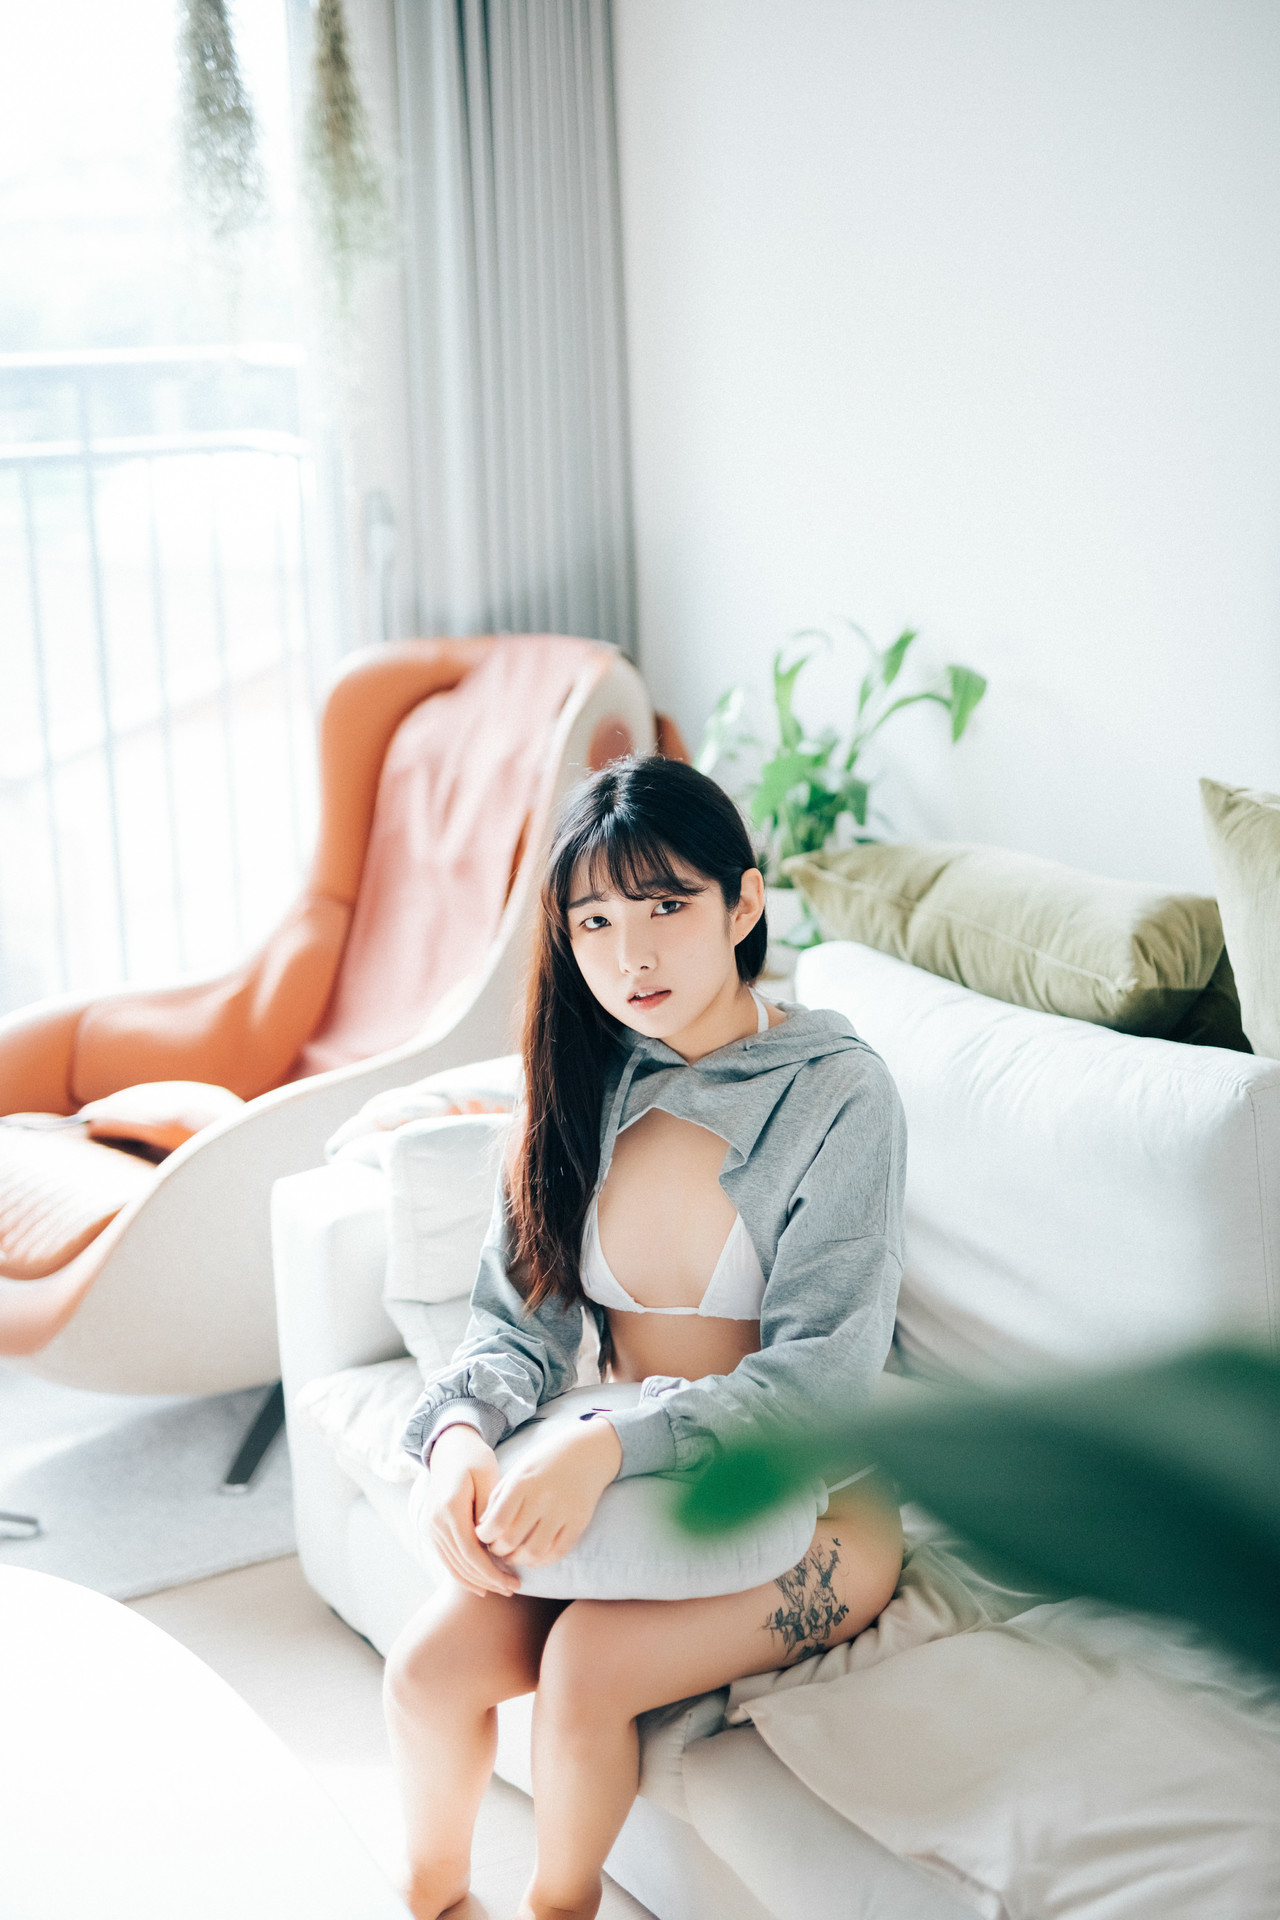 Sonson 손손, [Loozy] Date at home (+S Ver) Set.01(1)